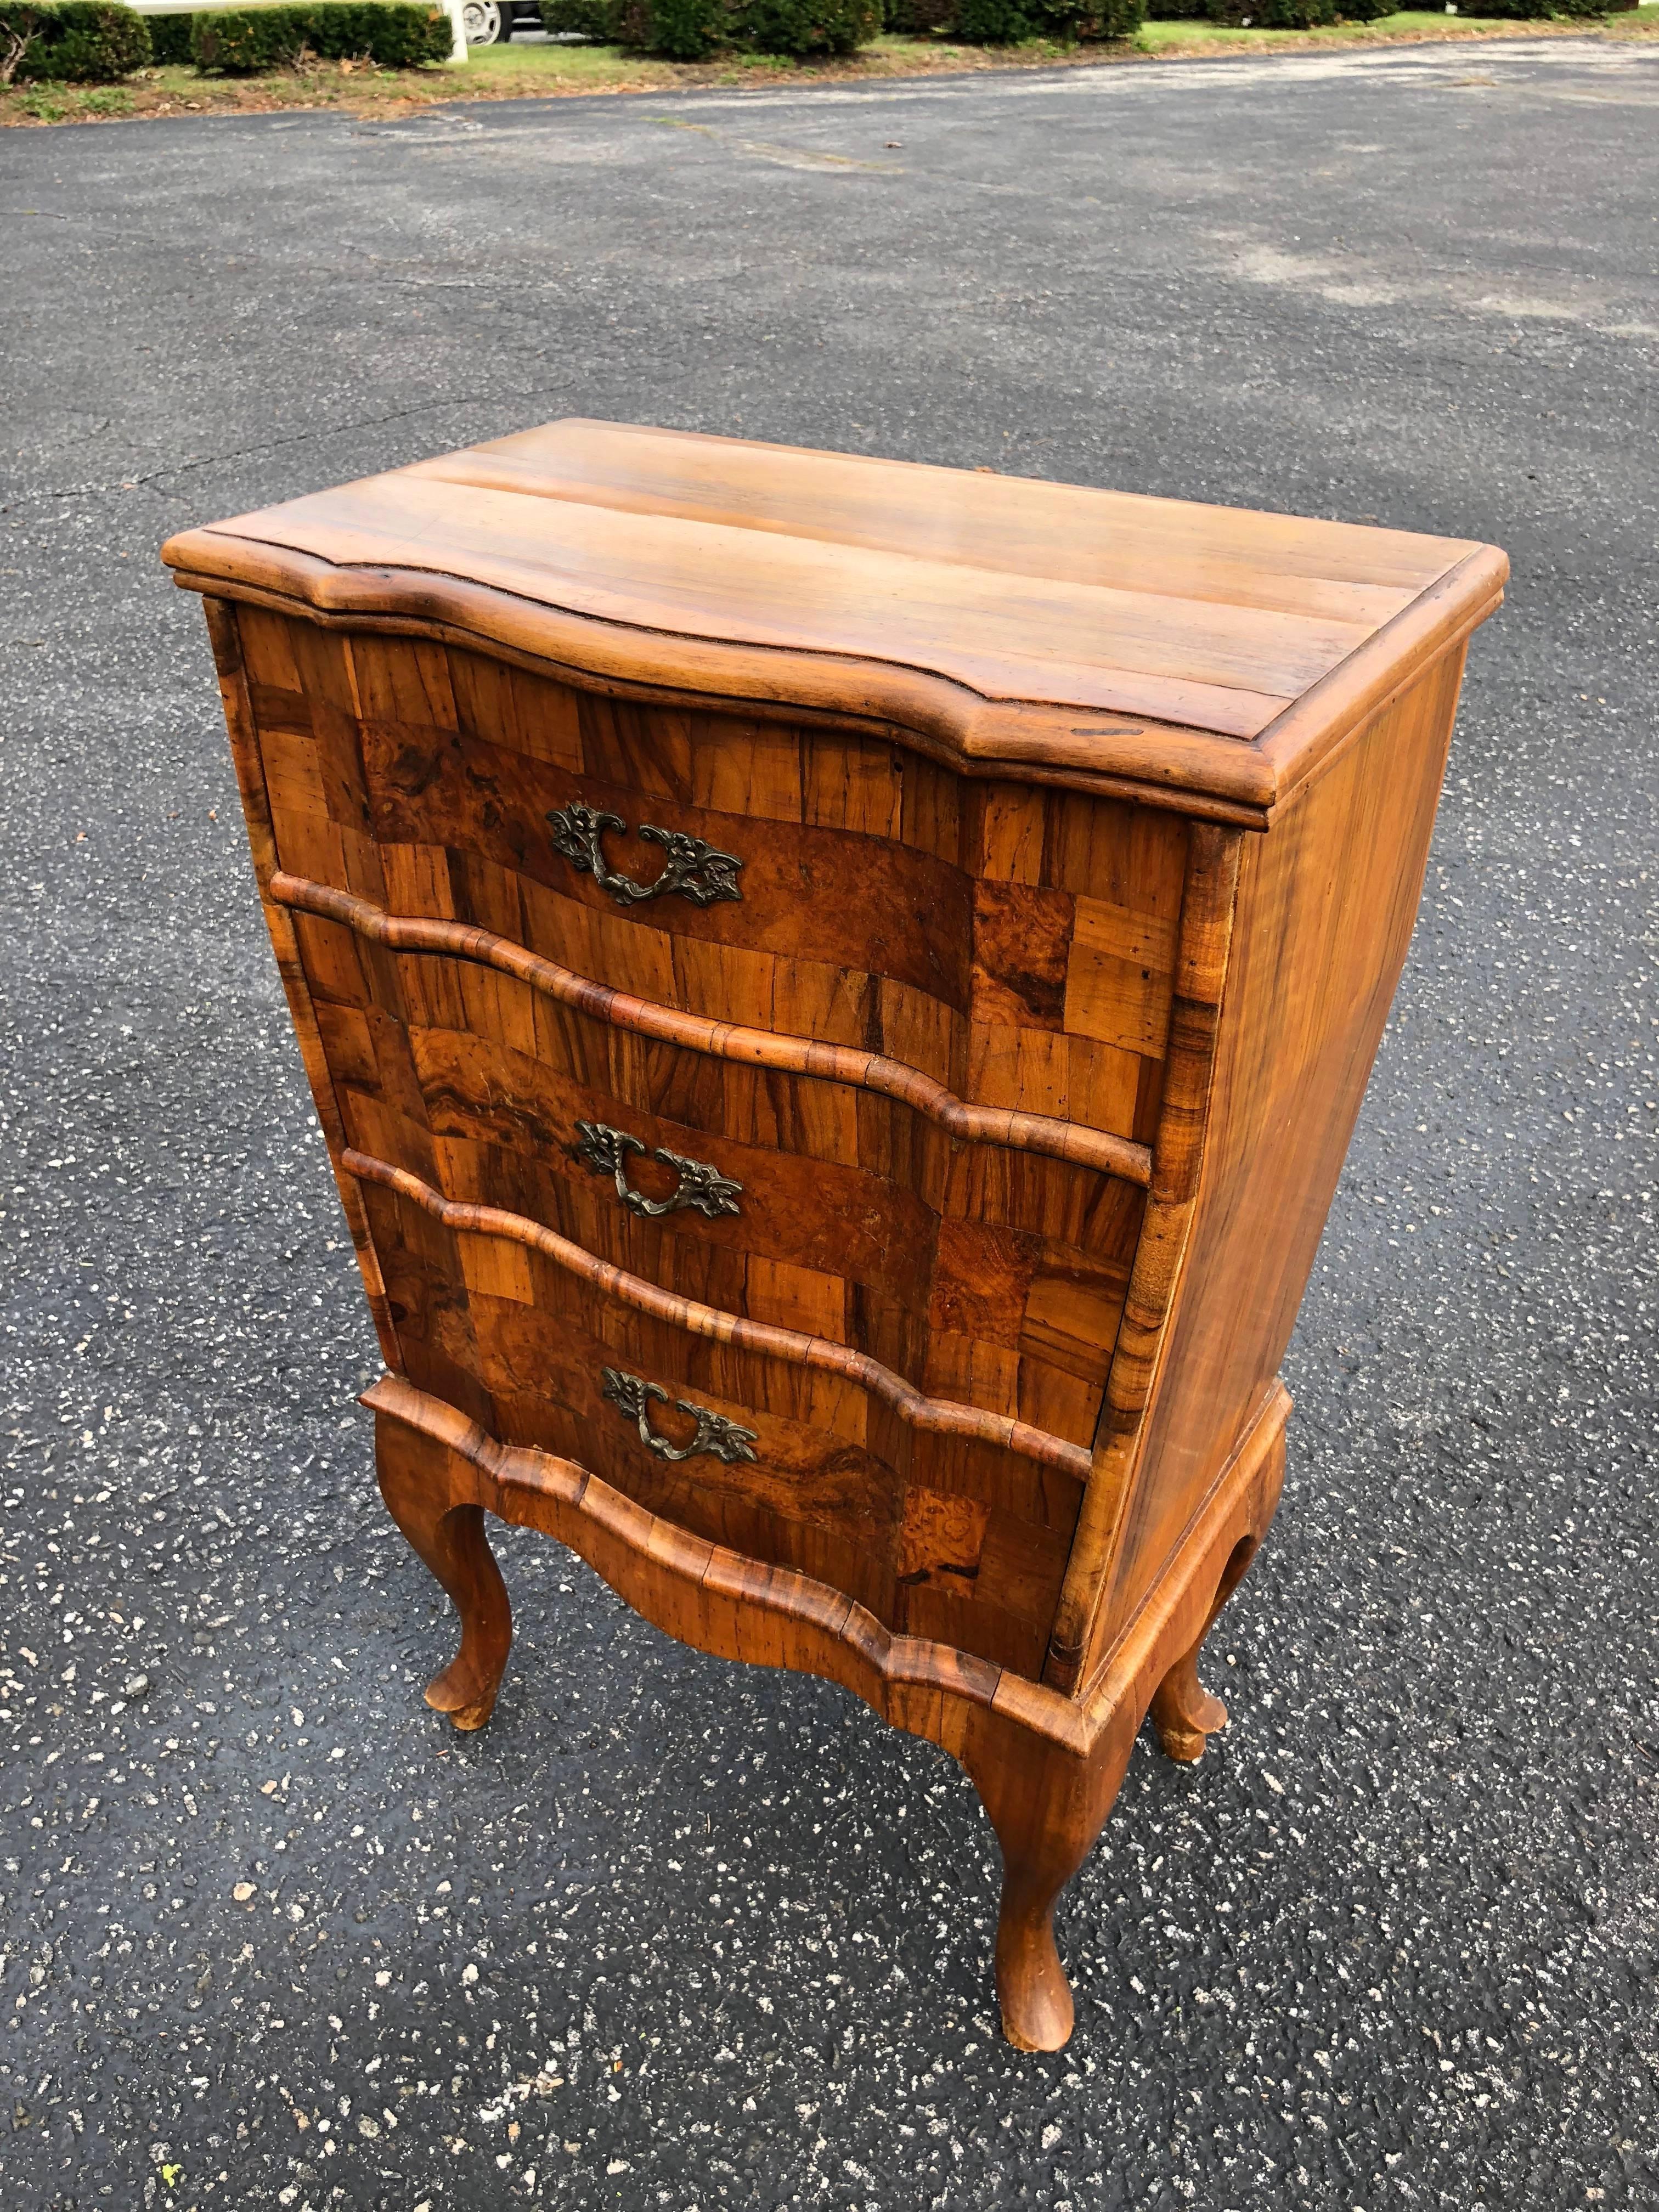 Italianate Olive wood Fruit wood Chest of Drawers. Three drawers make up this sweet diminutive piece. Perfect for boudoir or bathroom. Paper label on back that says Firenze. this item parcel ships for $55.